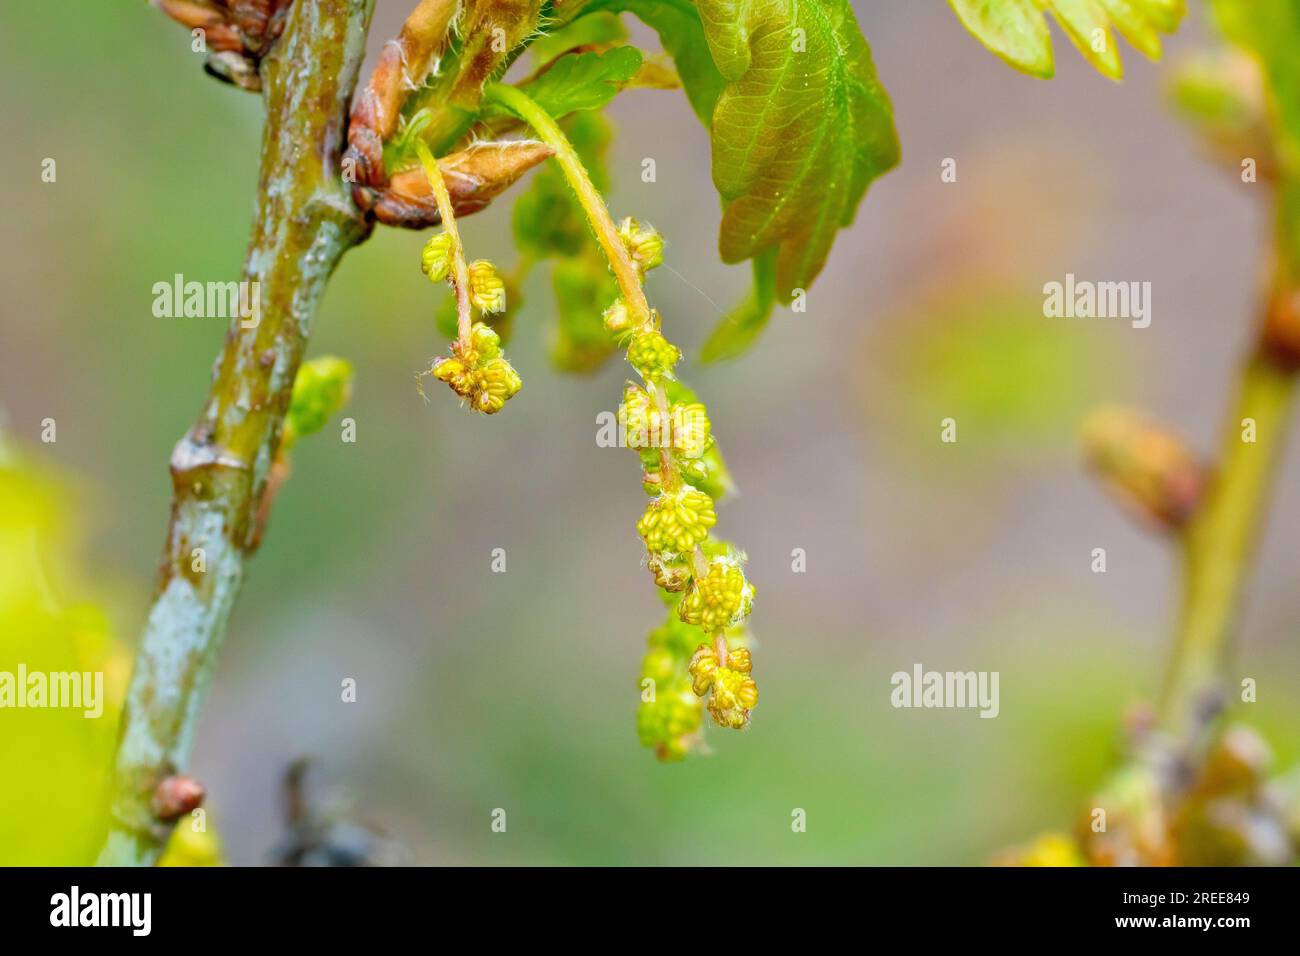 Oak (quercus), close up of the flowers or catkins produced by oak trees in the spring, isolated from the background. Stock Photo